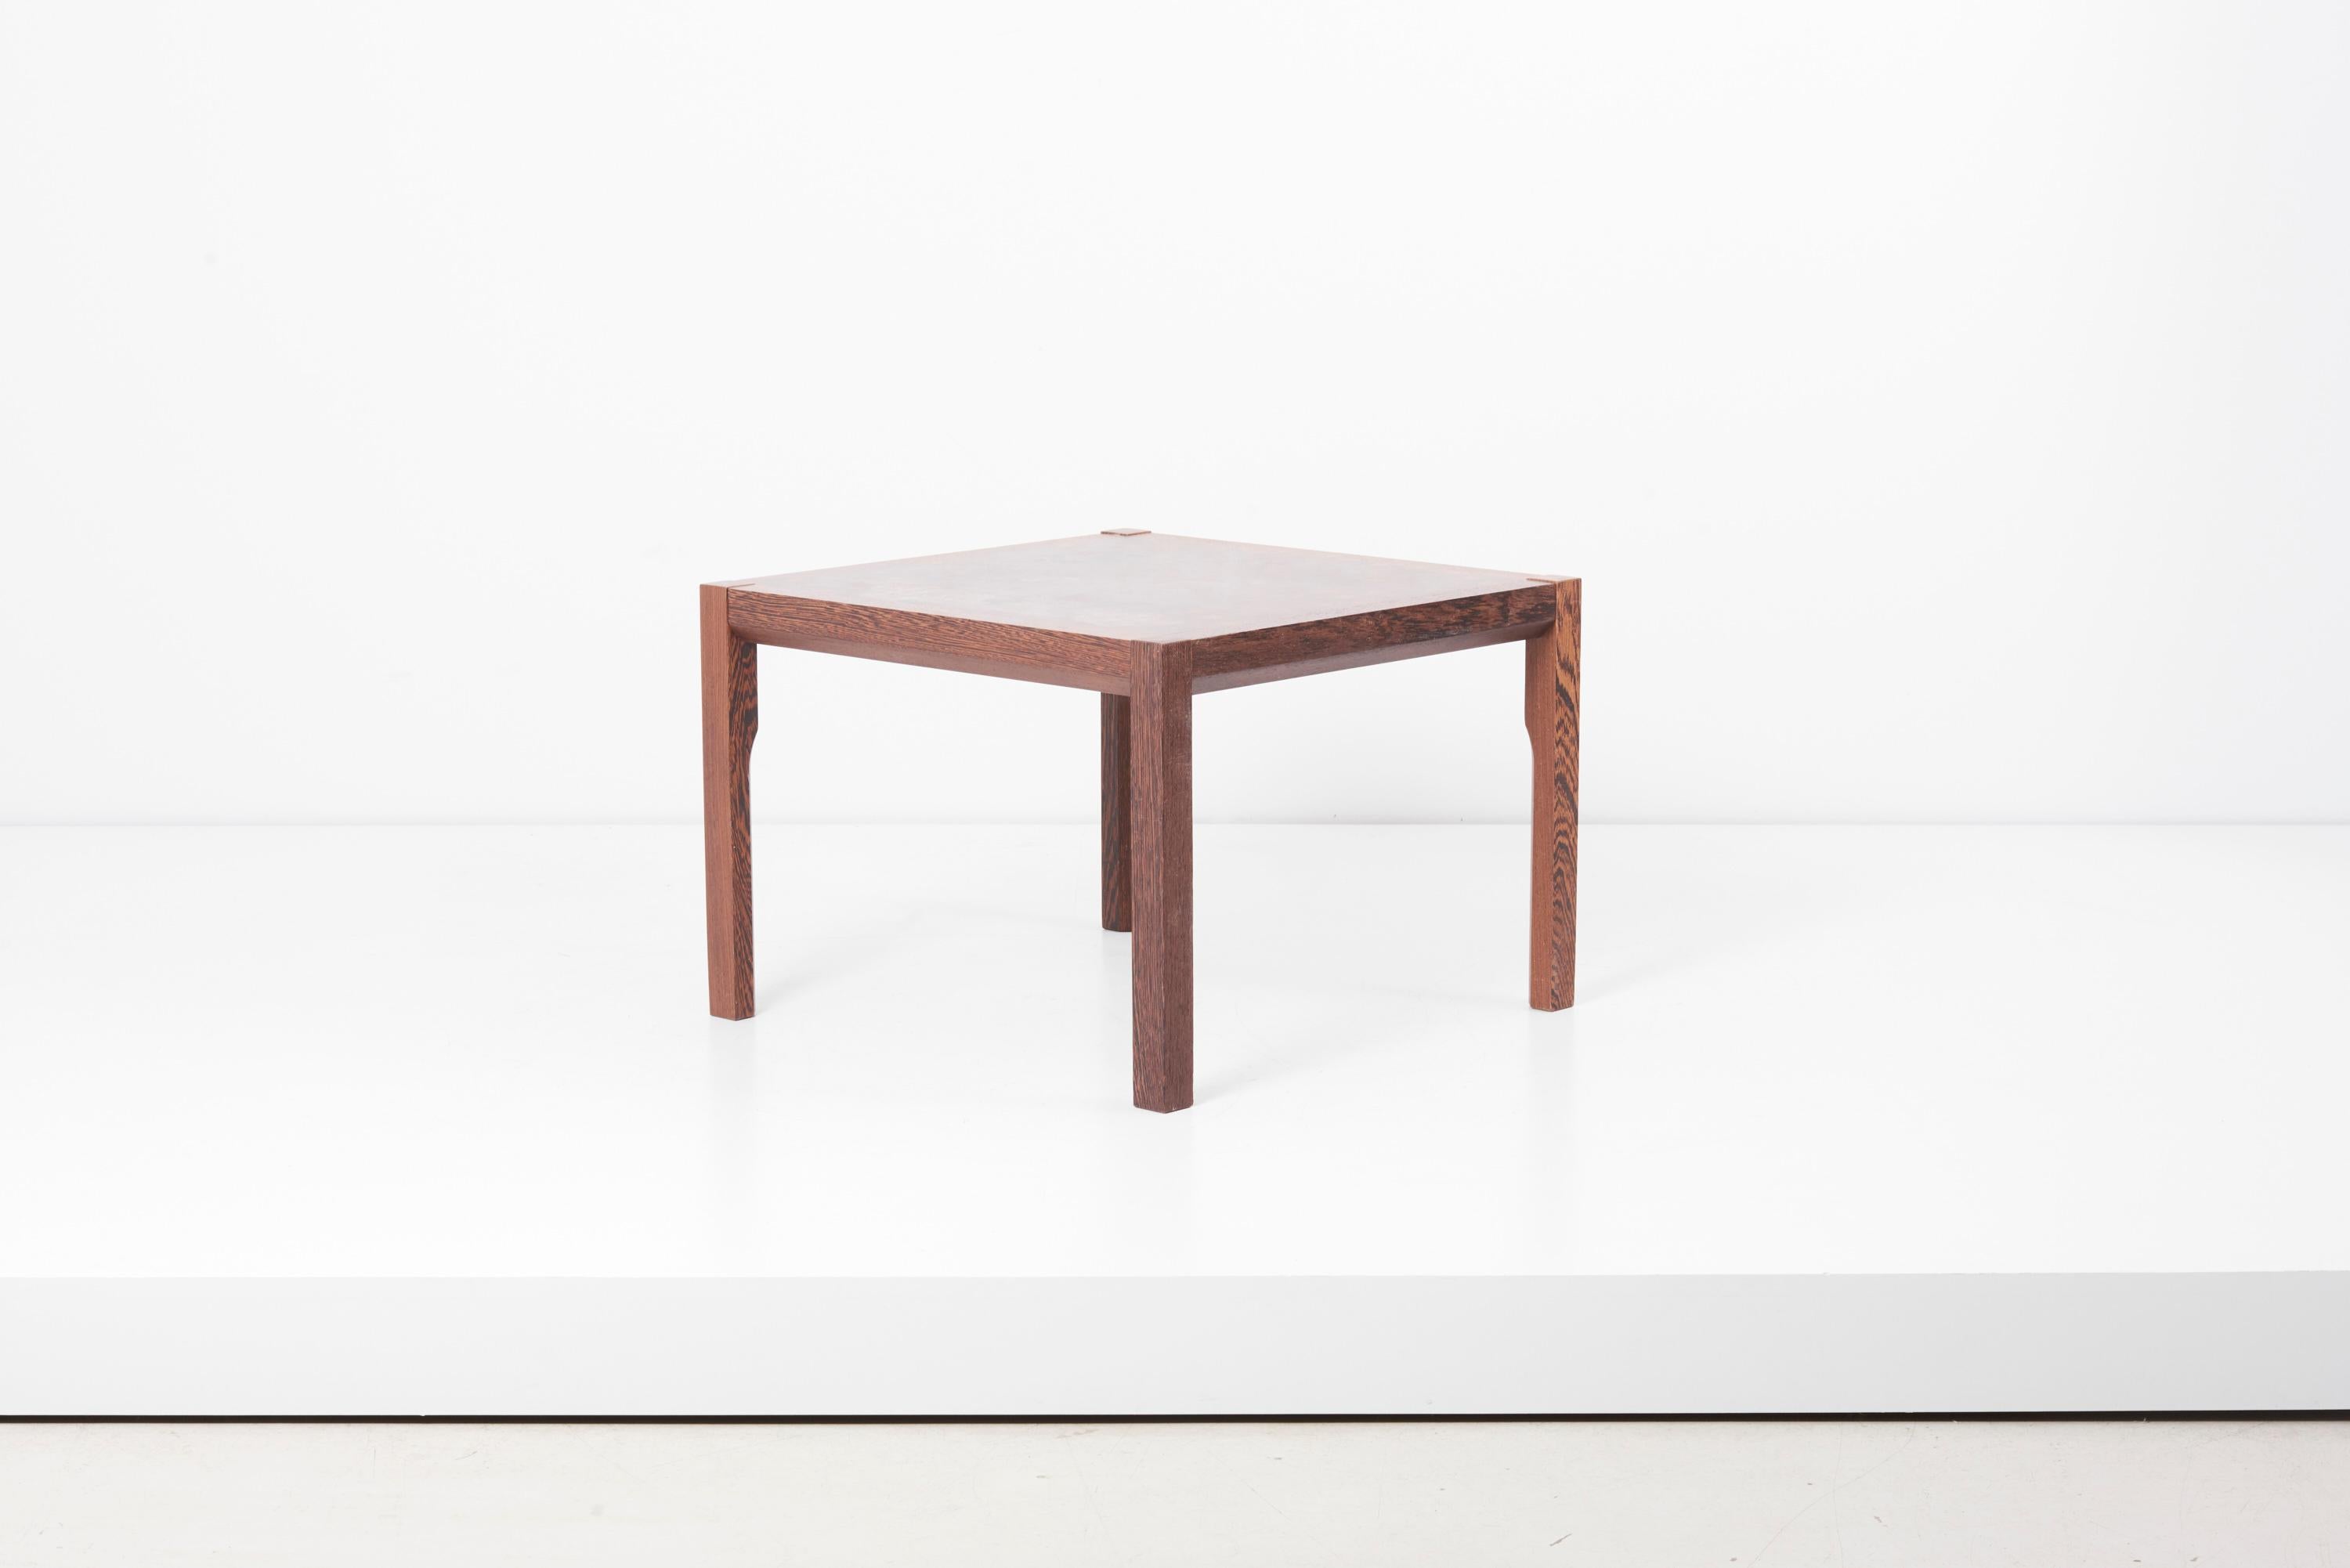 Wooden square coffee table, designed by architect Gorm Lindum and manufactured by Tranekær in Denmark. Bitmap structured table top, made of cubical solid pieces of teak combined to create an interesting structure and pattern. Unique and with serial